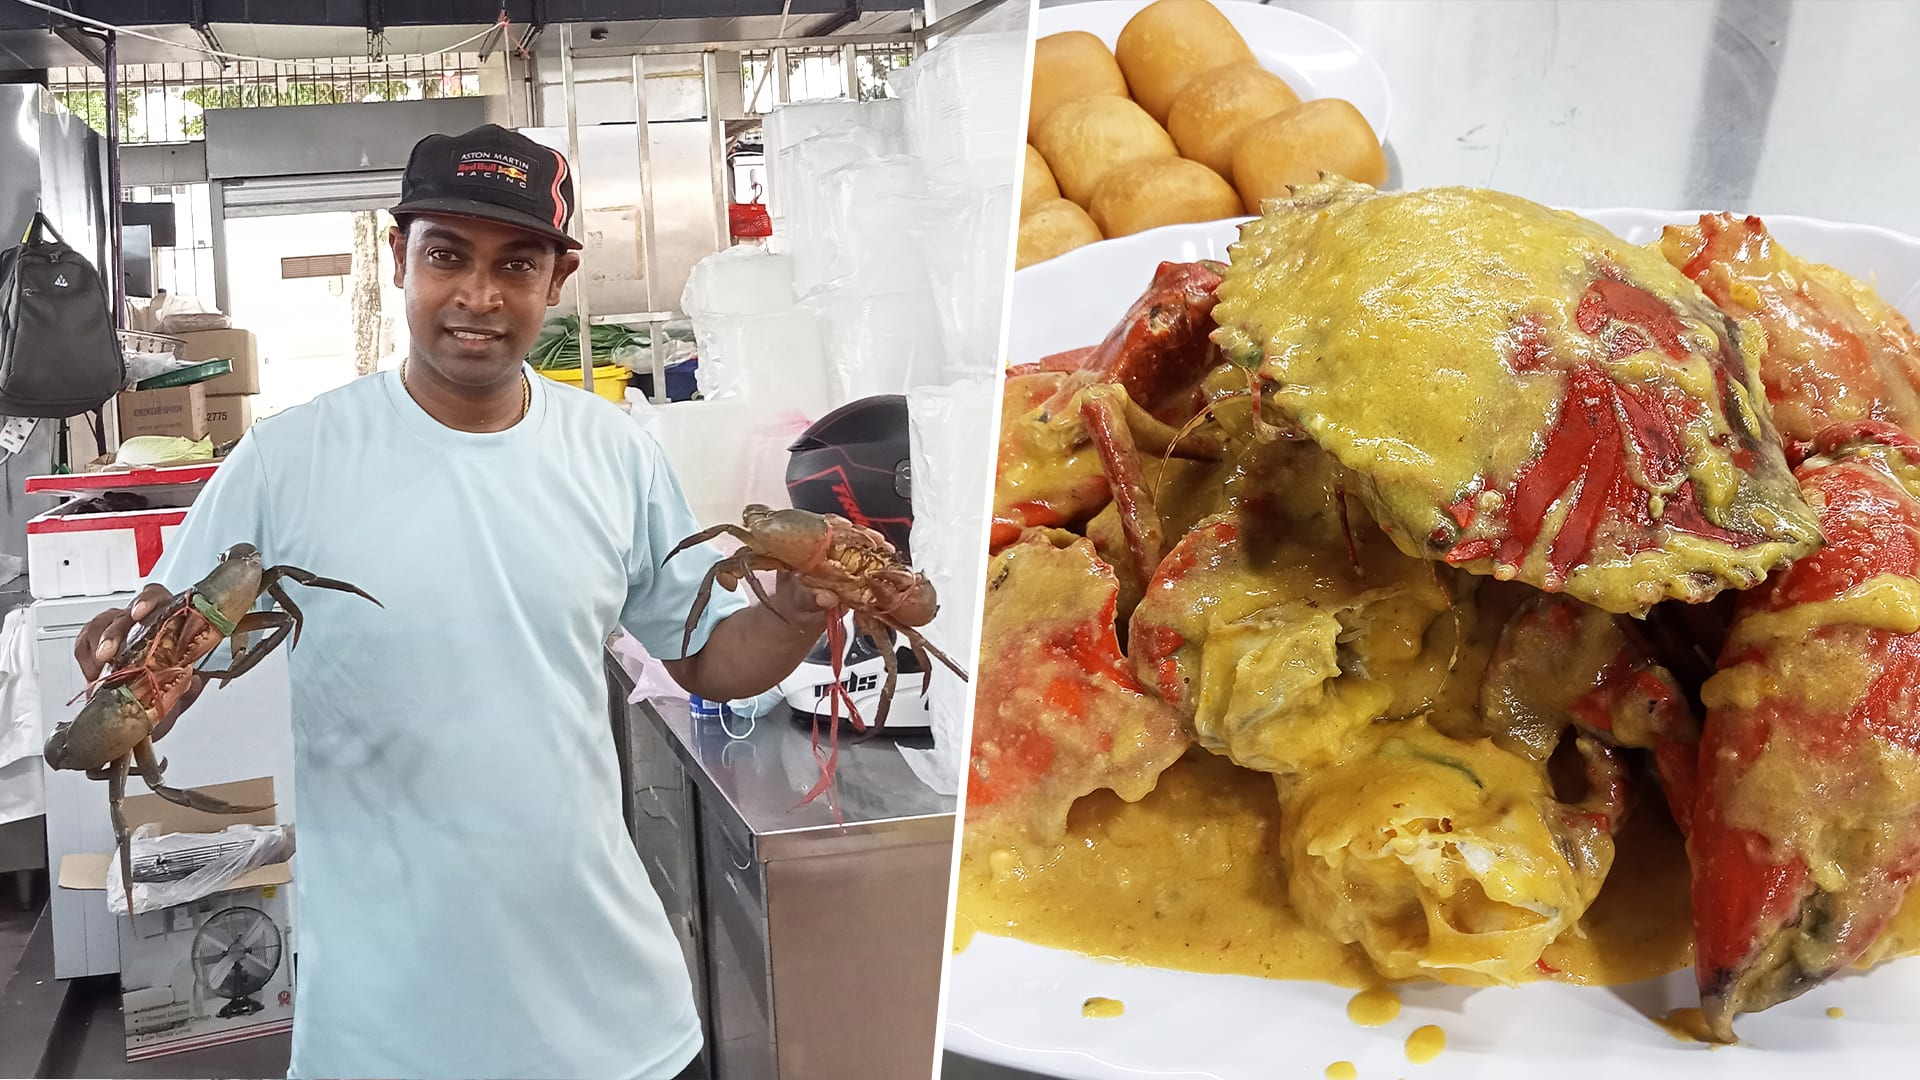 Viral Mandarin-Speaking Indian Hawker Opens New Zi Char Stall With 2 For $50 Crab Promo